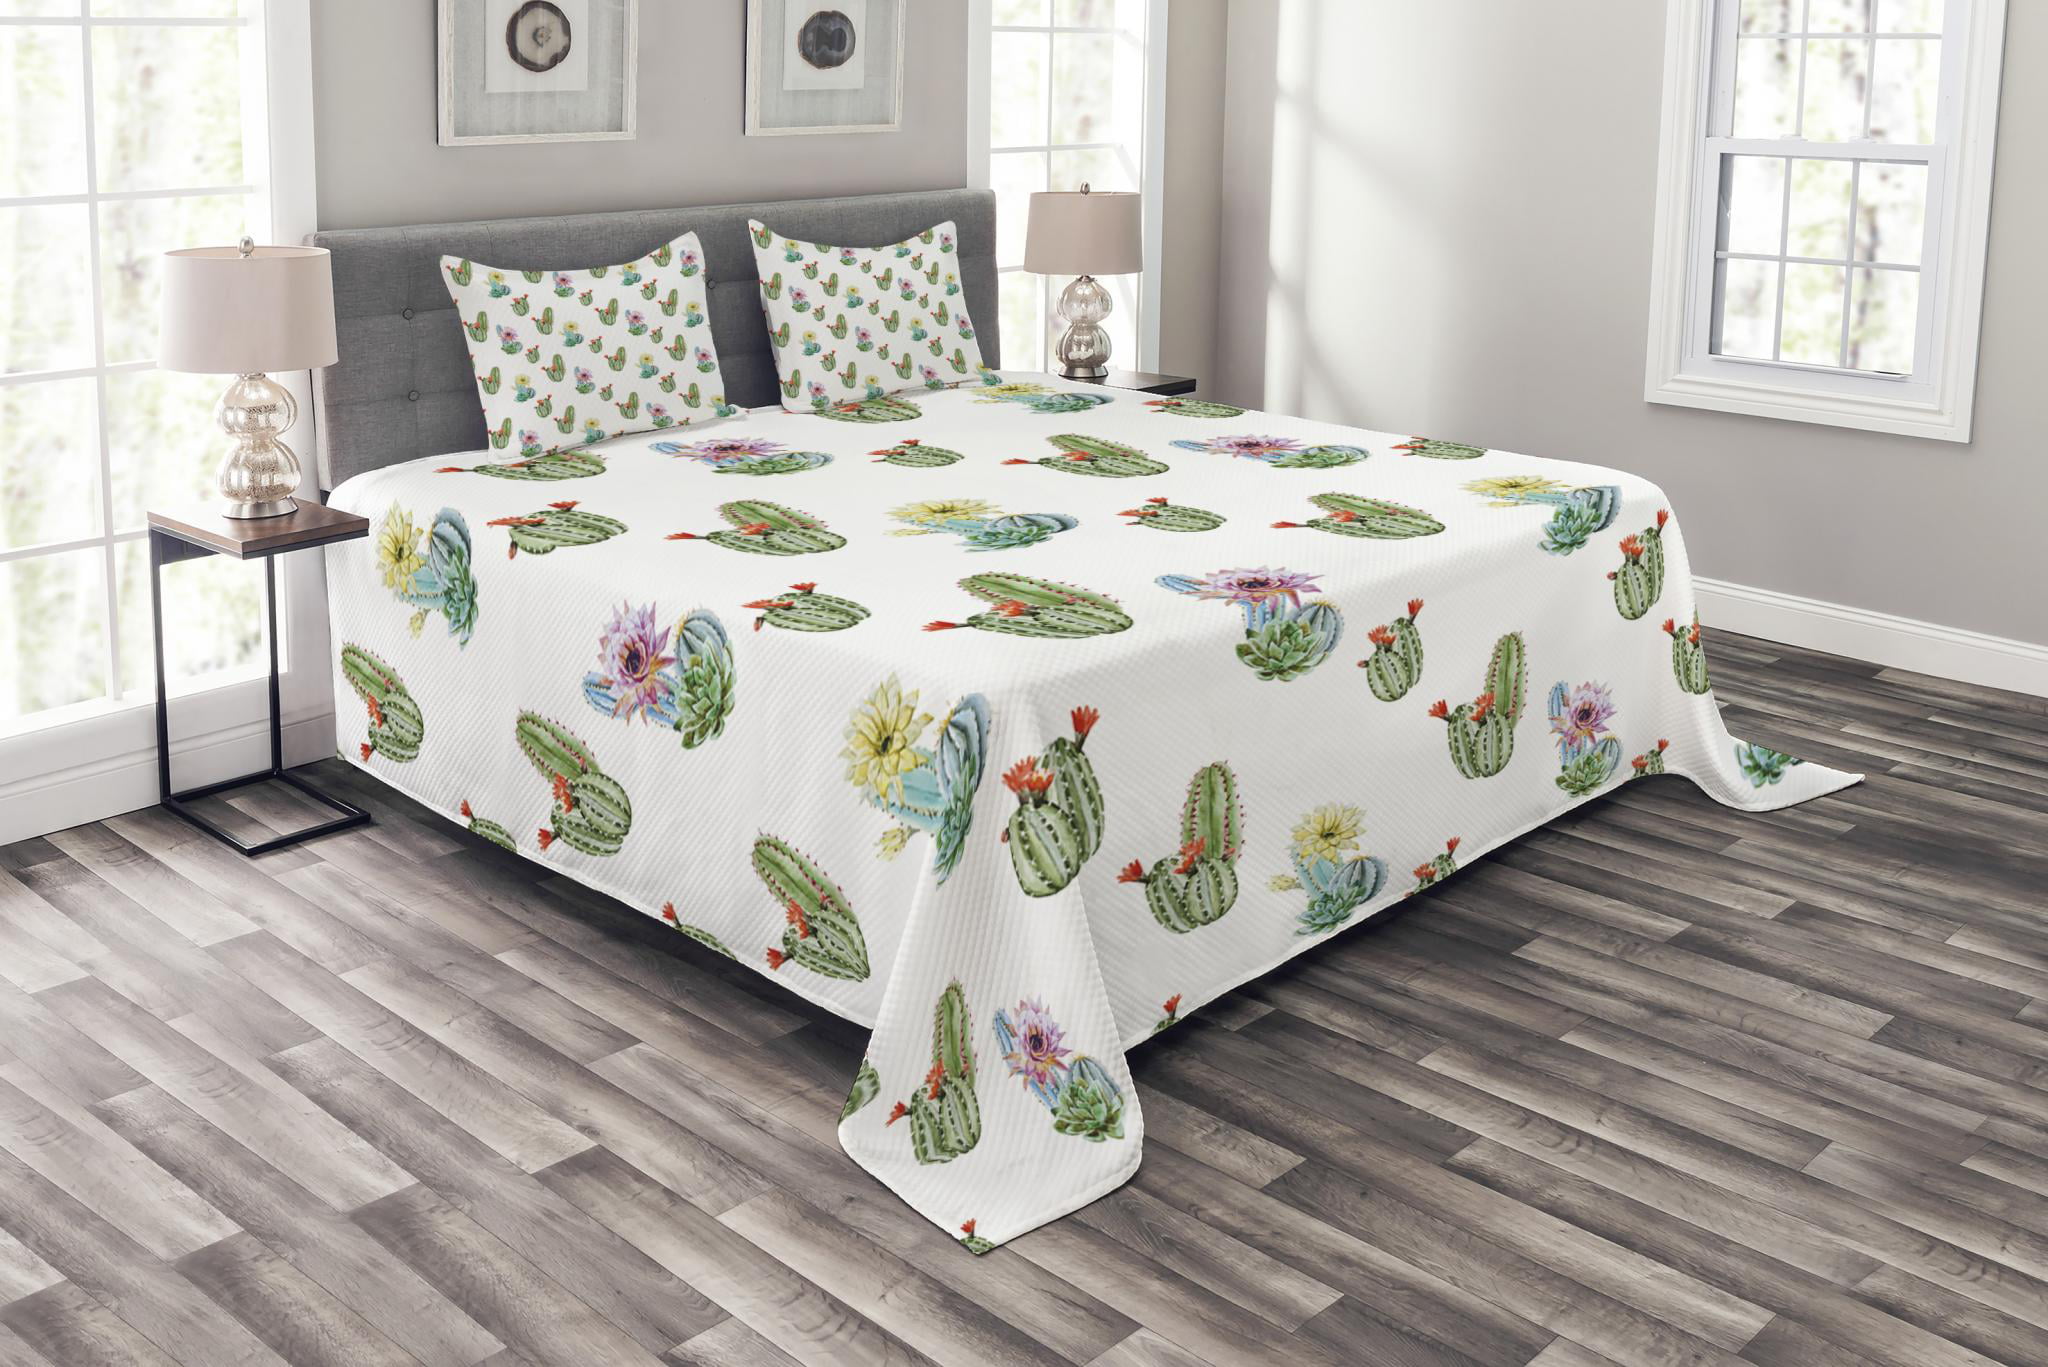 Pastel Green Thorny Vintage Hawaiian Nature Flourishing Succulents and Cactus Bouquets Picture Decorative 3 Piece Bedding Set with 2 Pillow Shams Queen Size Ambesonne Cactus Duvet Cover Set